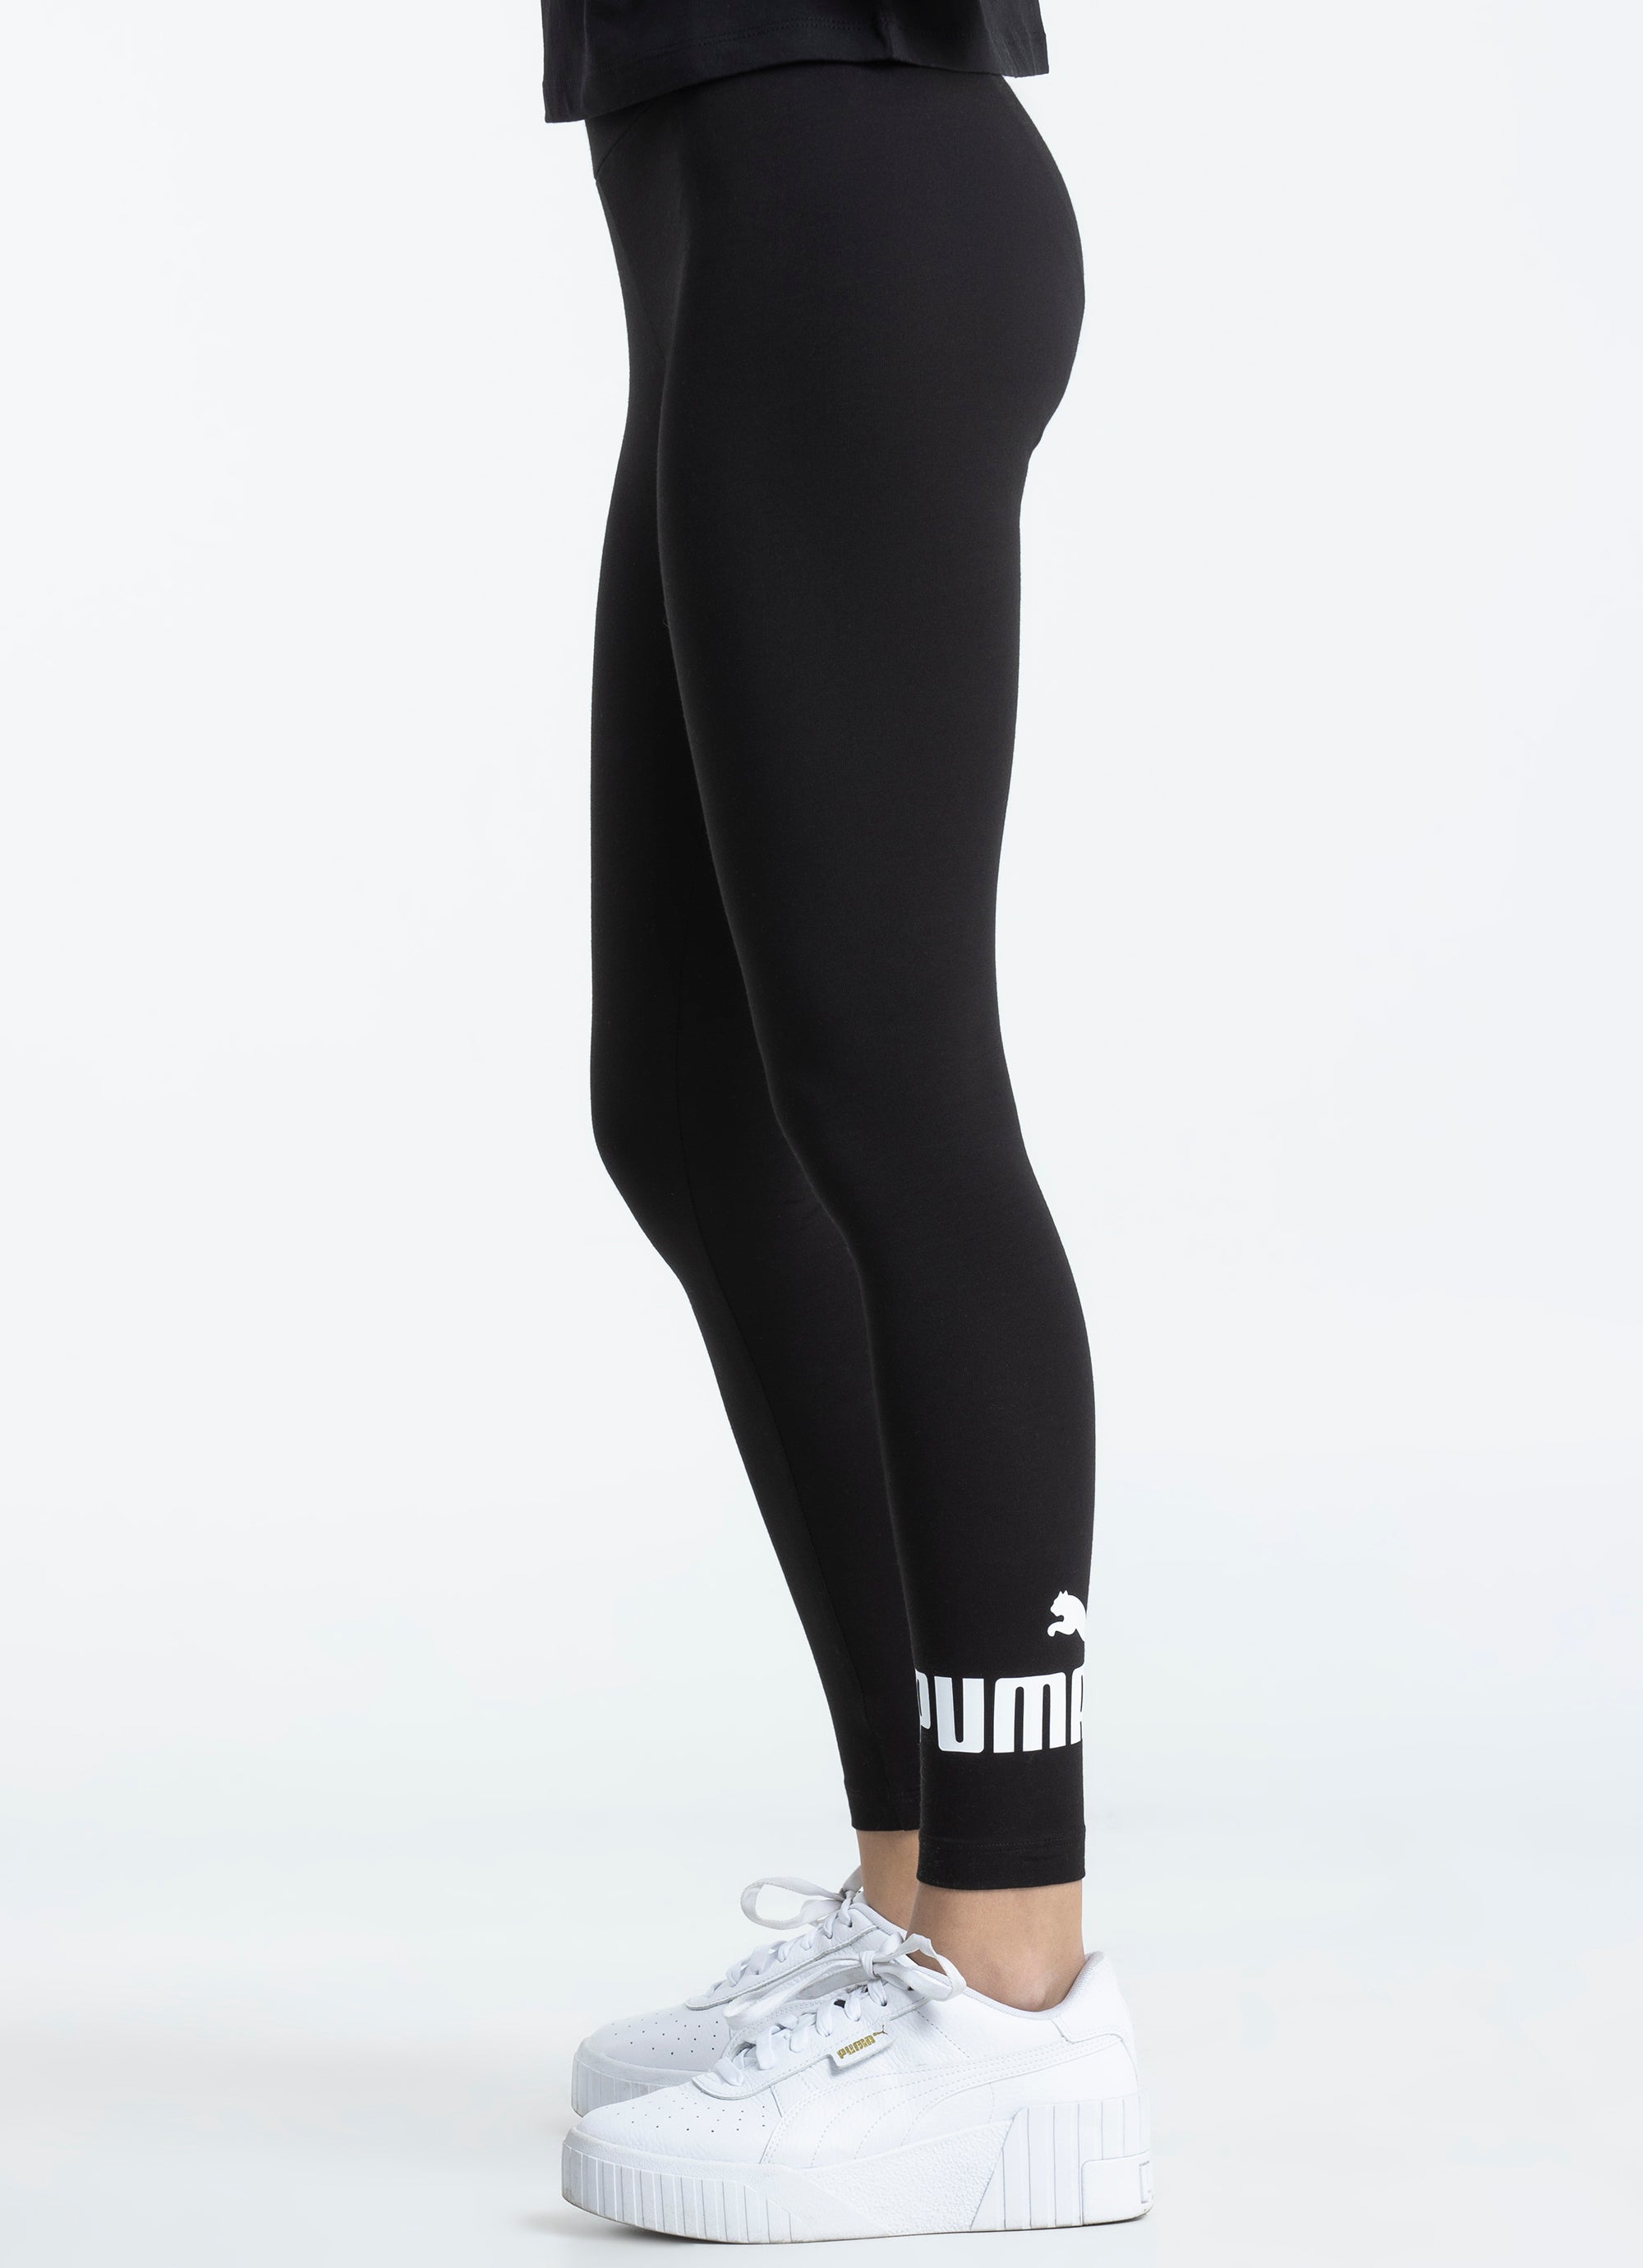 PUMA Solid Women Blue Tights - Buy PUMA Solid Women Blue Tights Online at  Best Prices in India | Flipkart.com